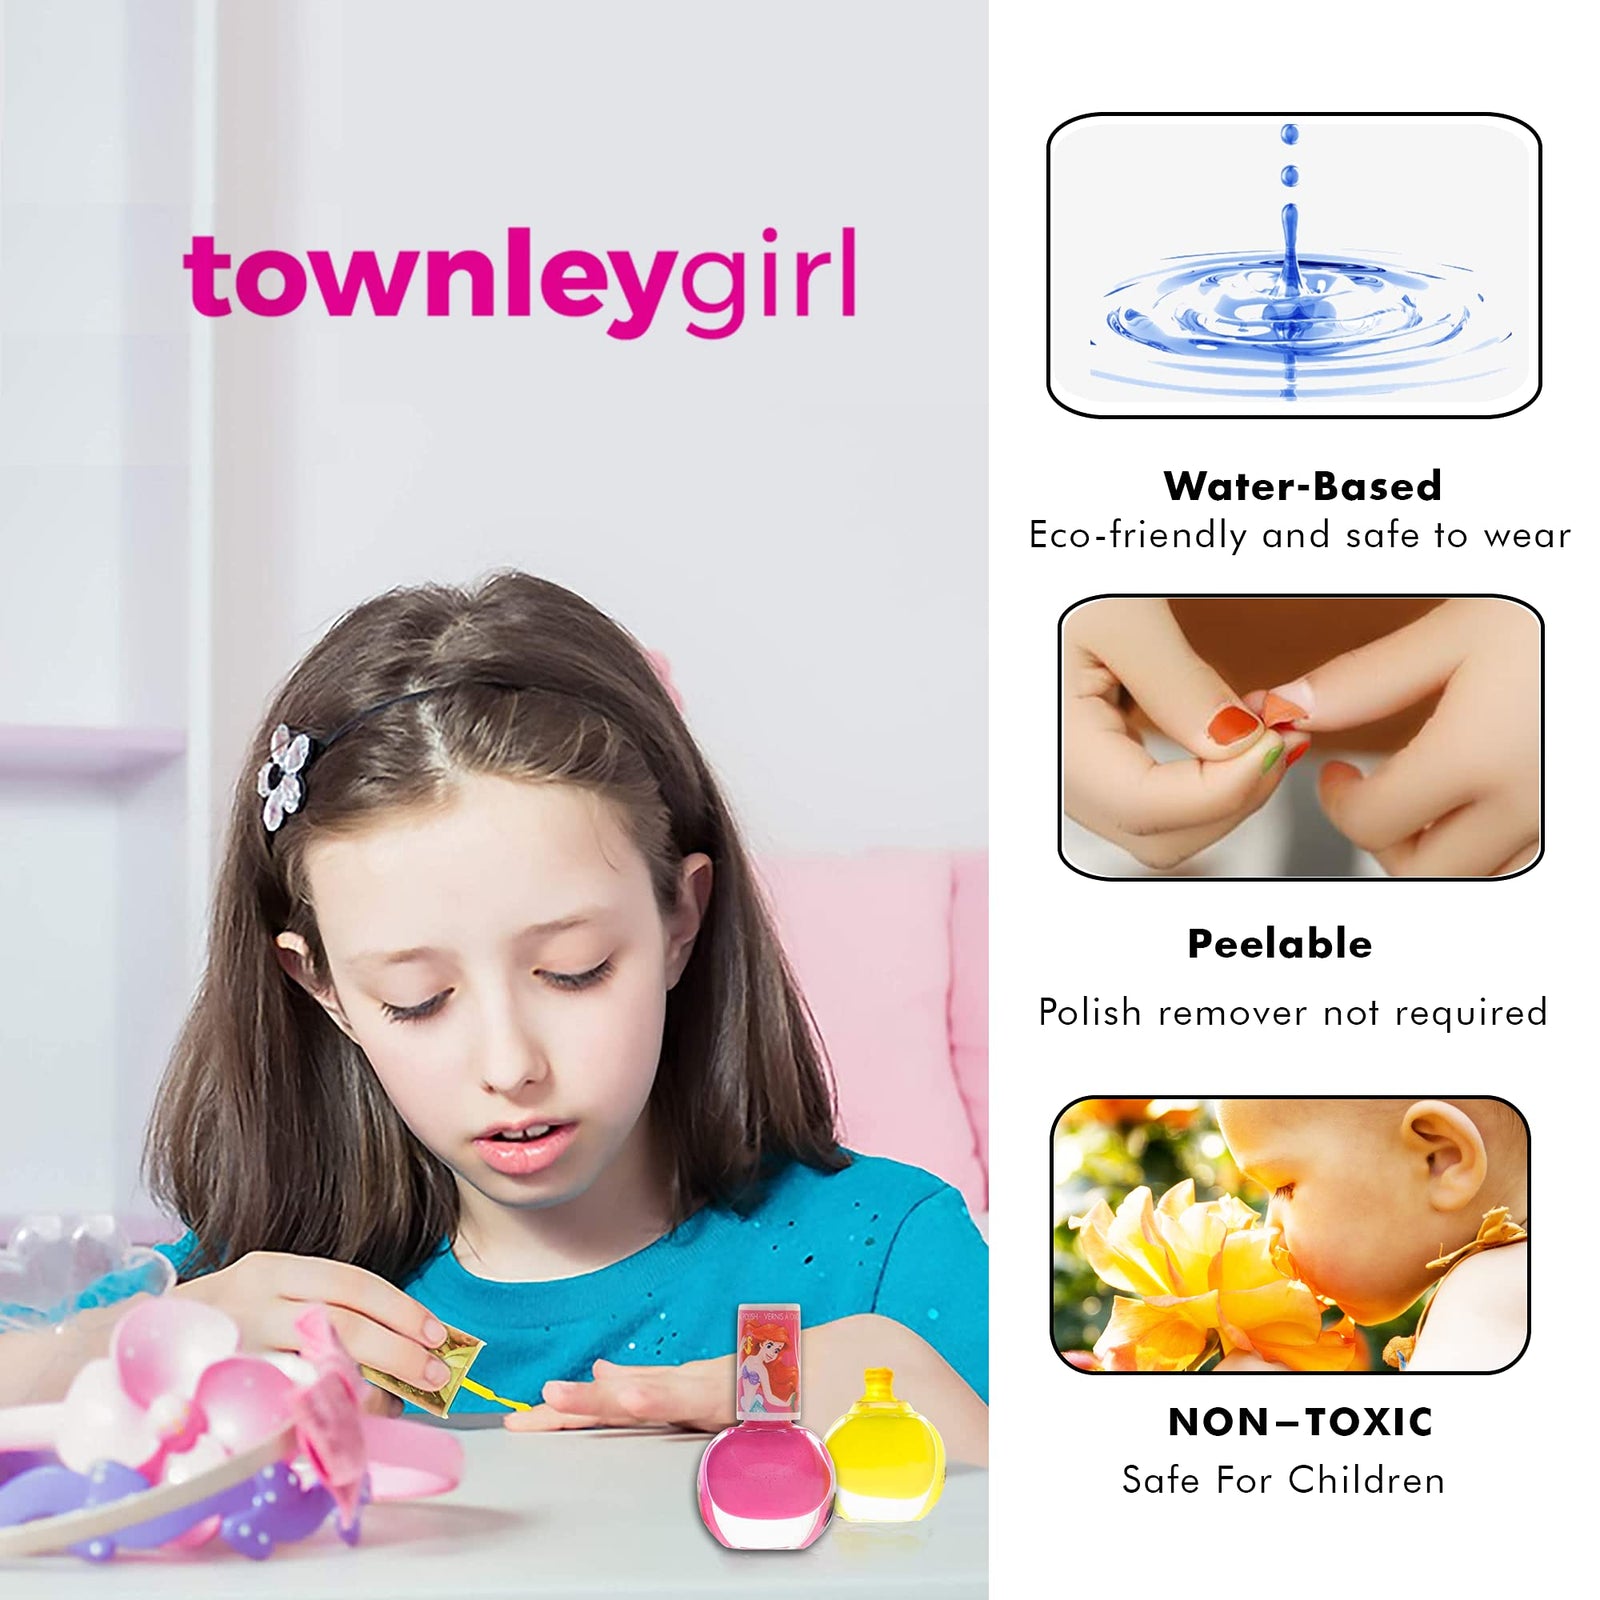 Disney Princess - Townley Girl Super Sparkly Cosmetic Makeup Set for Girls with Lip Gloss Nail Polish Nail Stickers - 11 Pcs|Perfect for Parties Sleepovers Makeovers| Birthday Gift for Girls 3 Yrs+